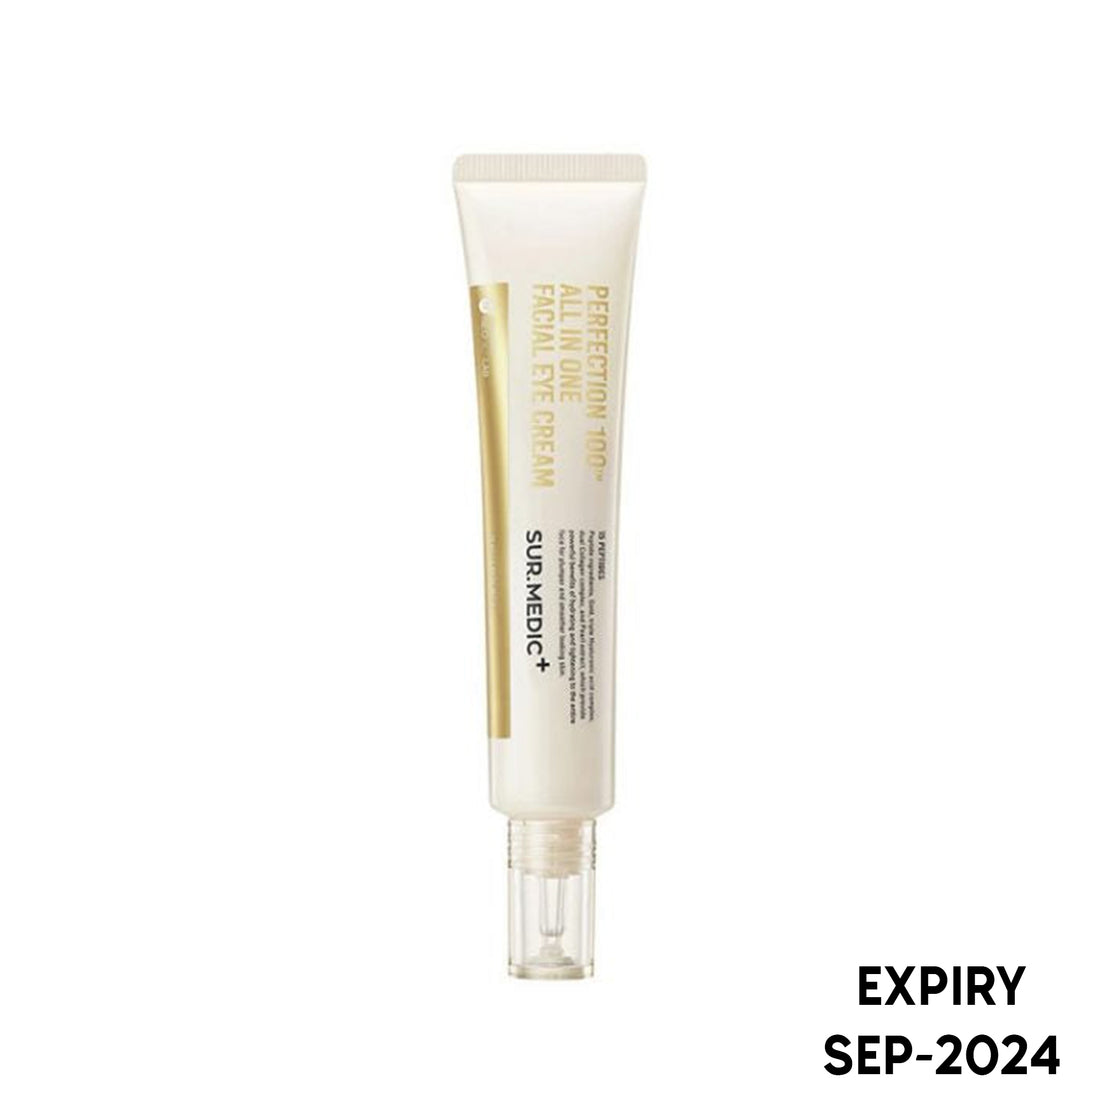 Sur.Medic+ Perfection 100 All In One Facial Eye Cream (35ml)